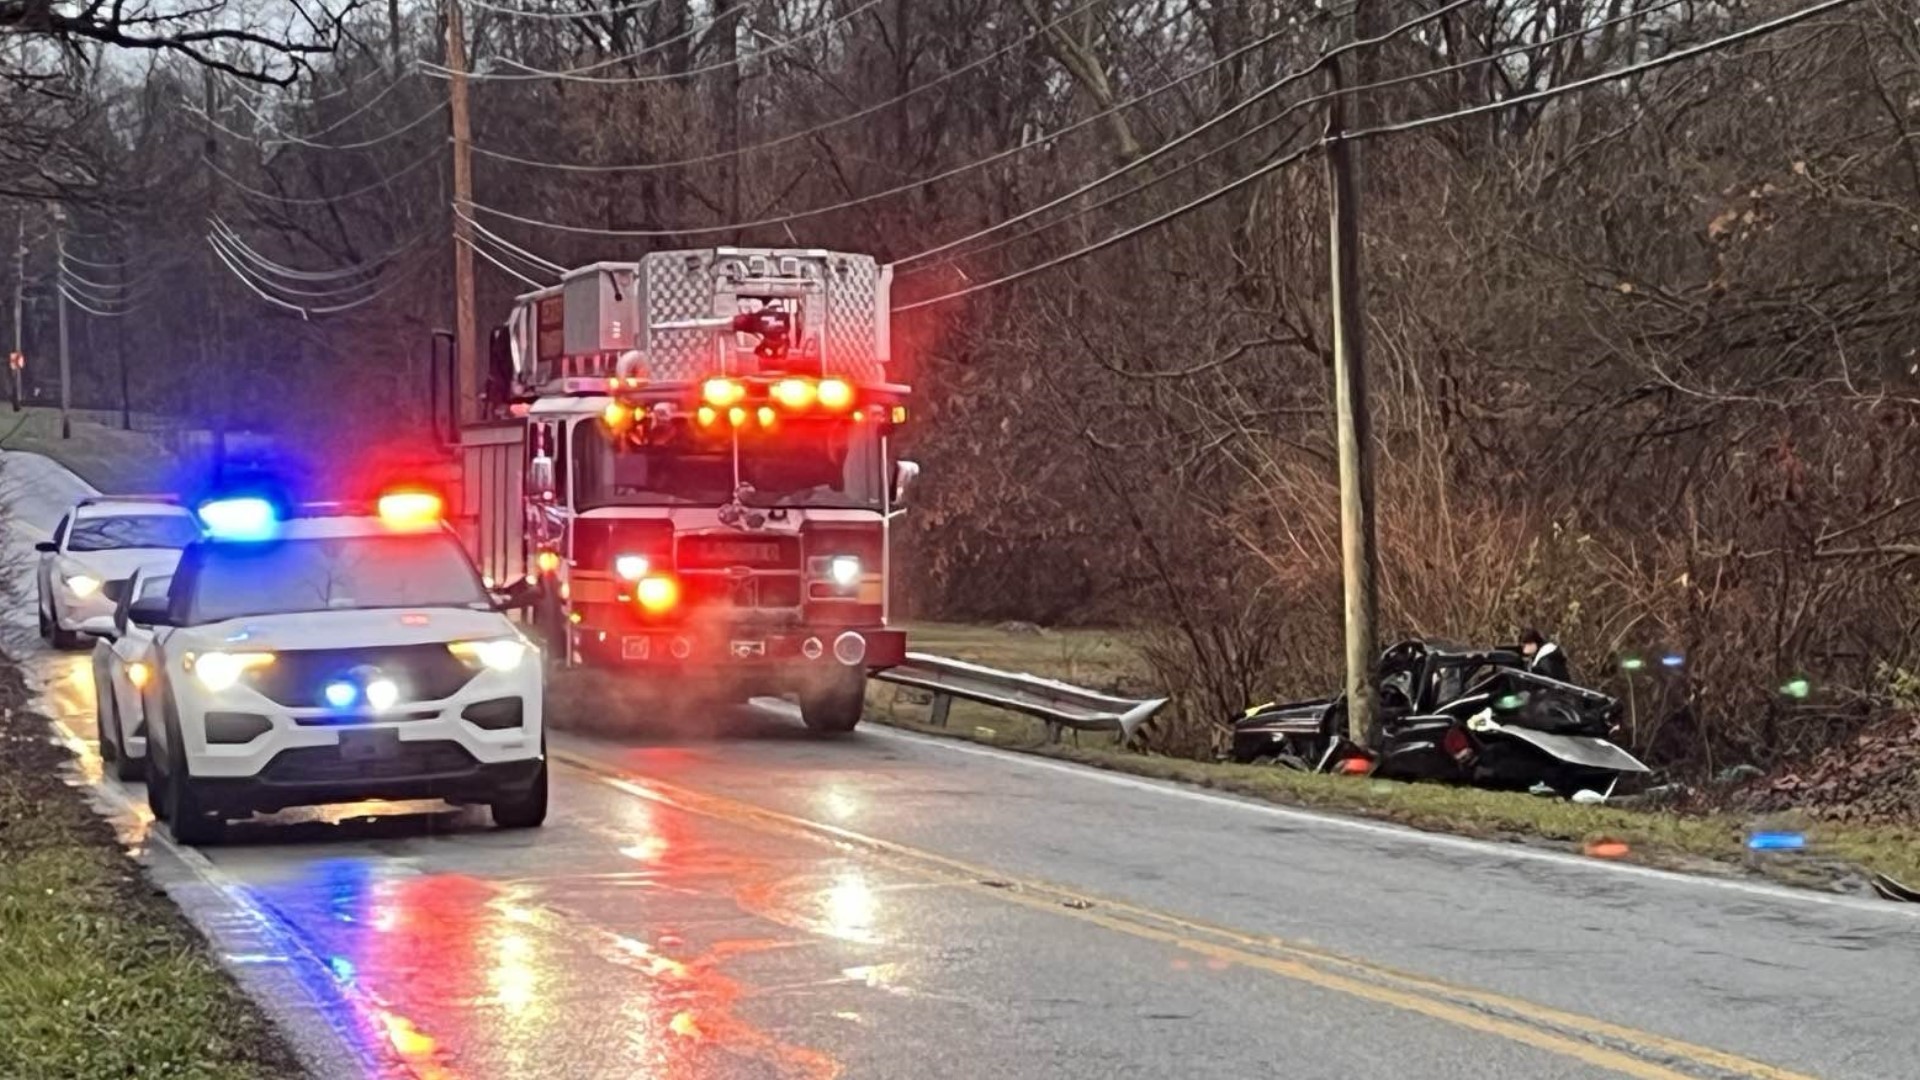 The crash happened Sunday just after 7 a.m. in the 7900 block of Mooresville Road, near Kentucky Avenue.